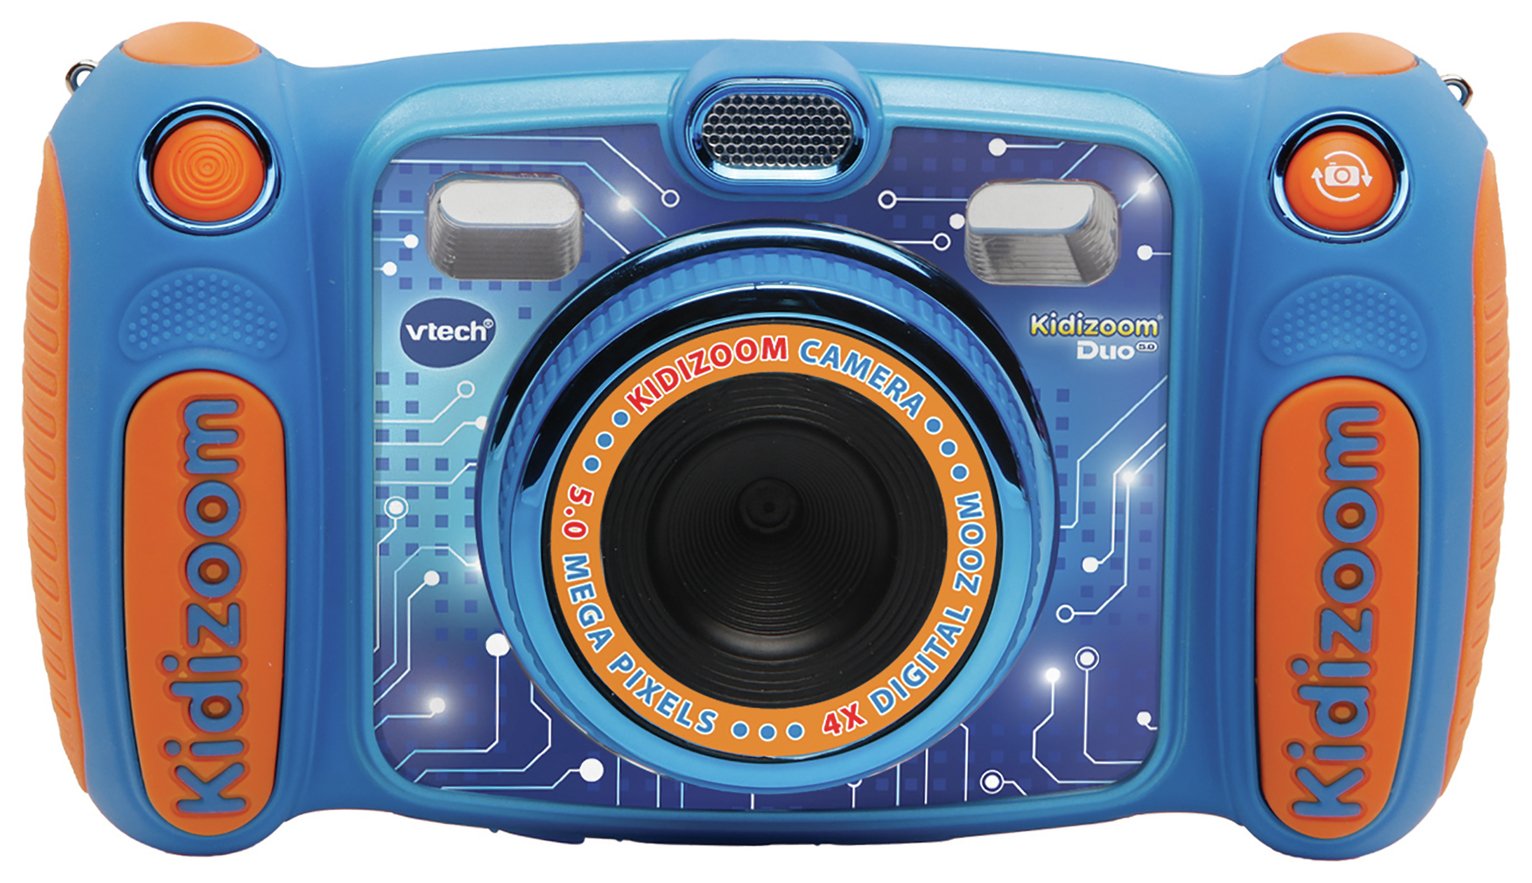 VTech Kidizoom 5MP Camera Review